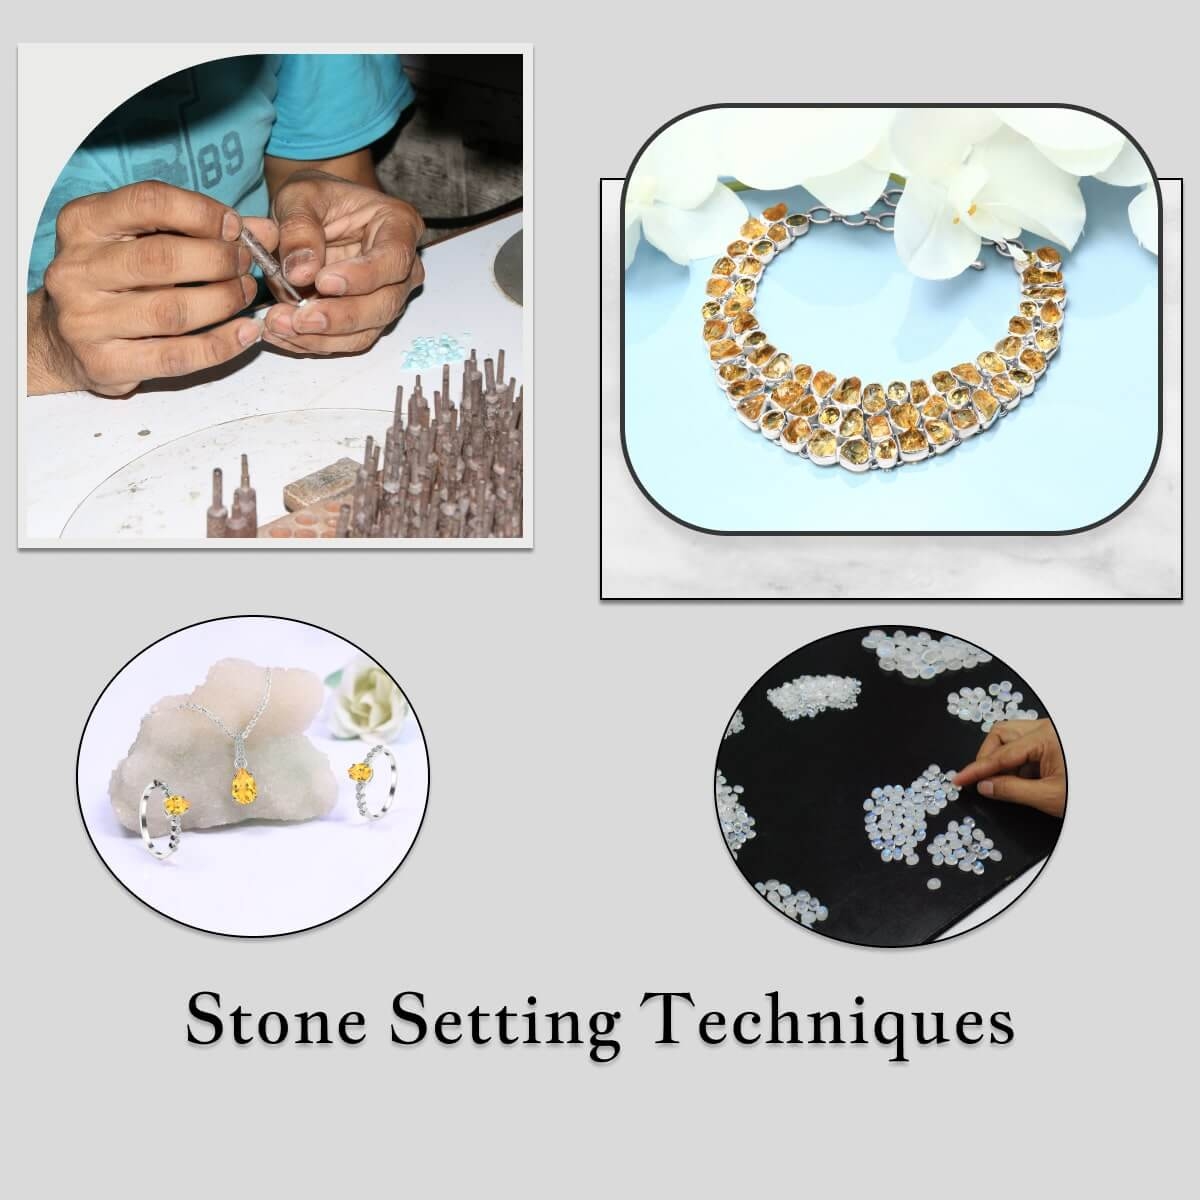 Types of Stone Settings